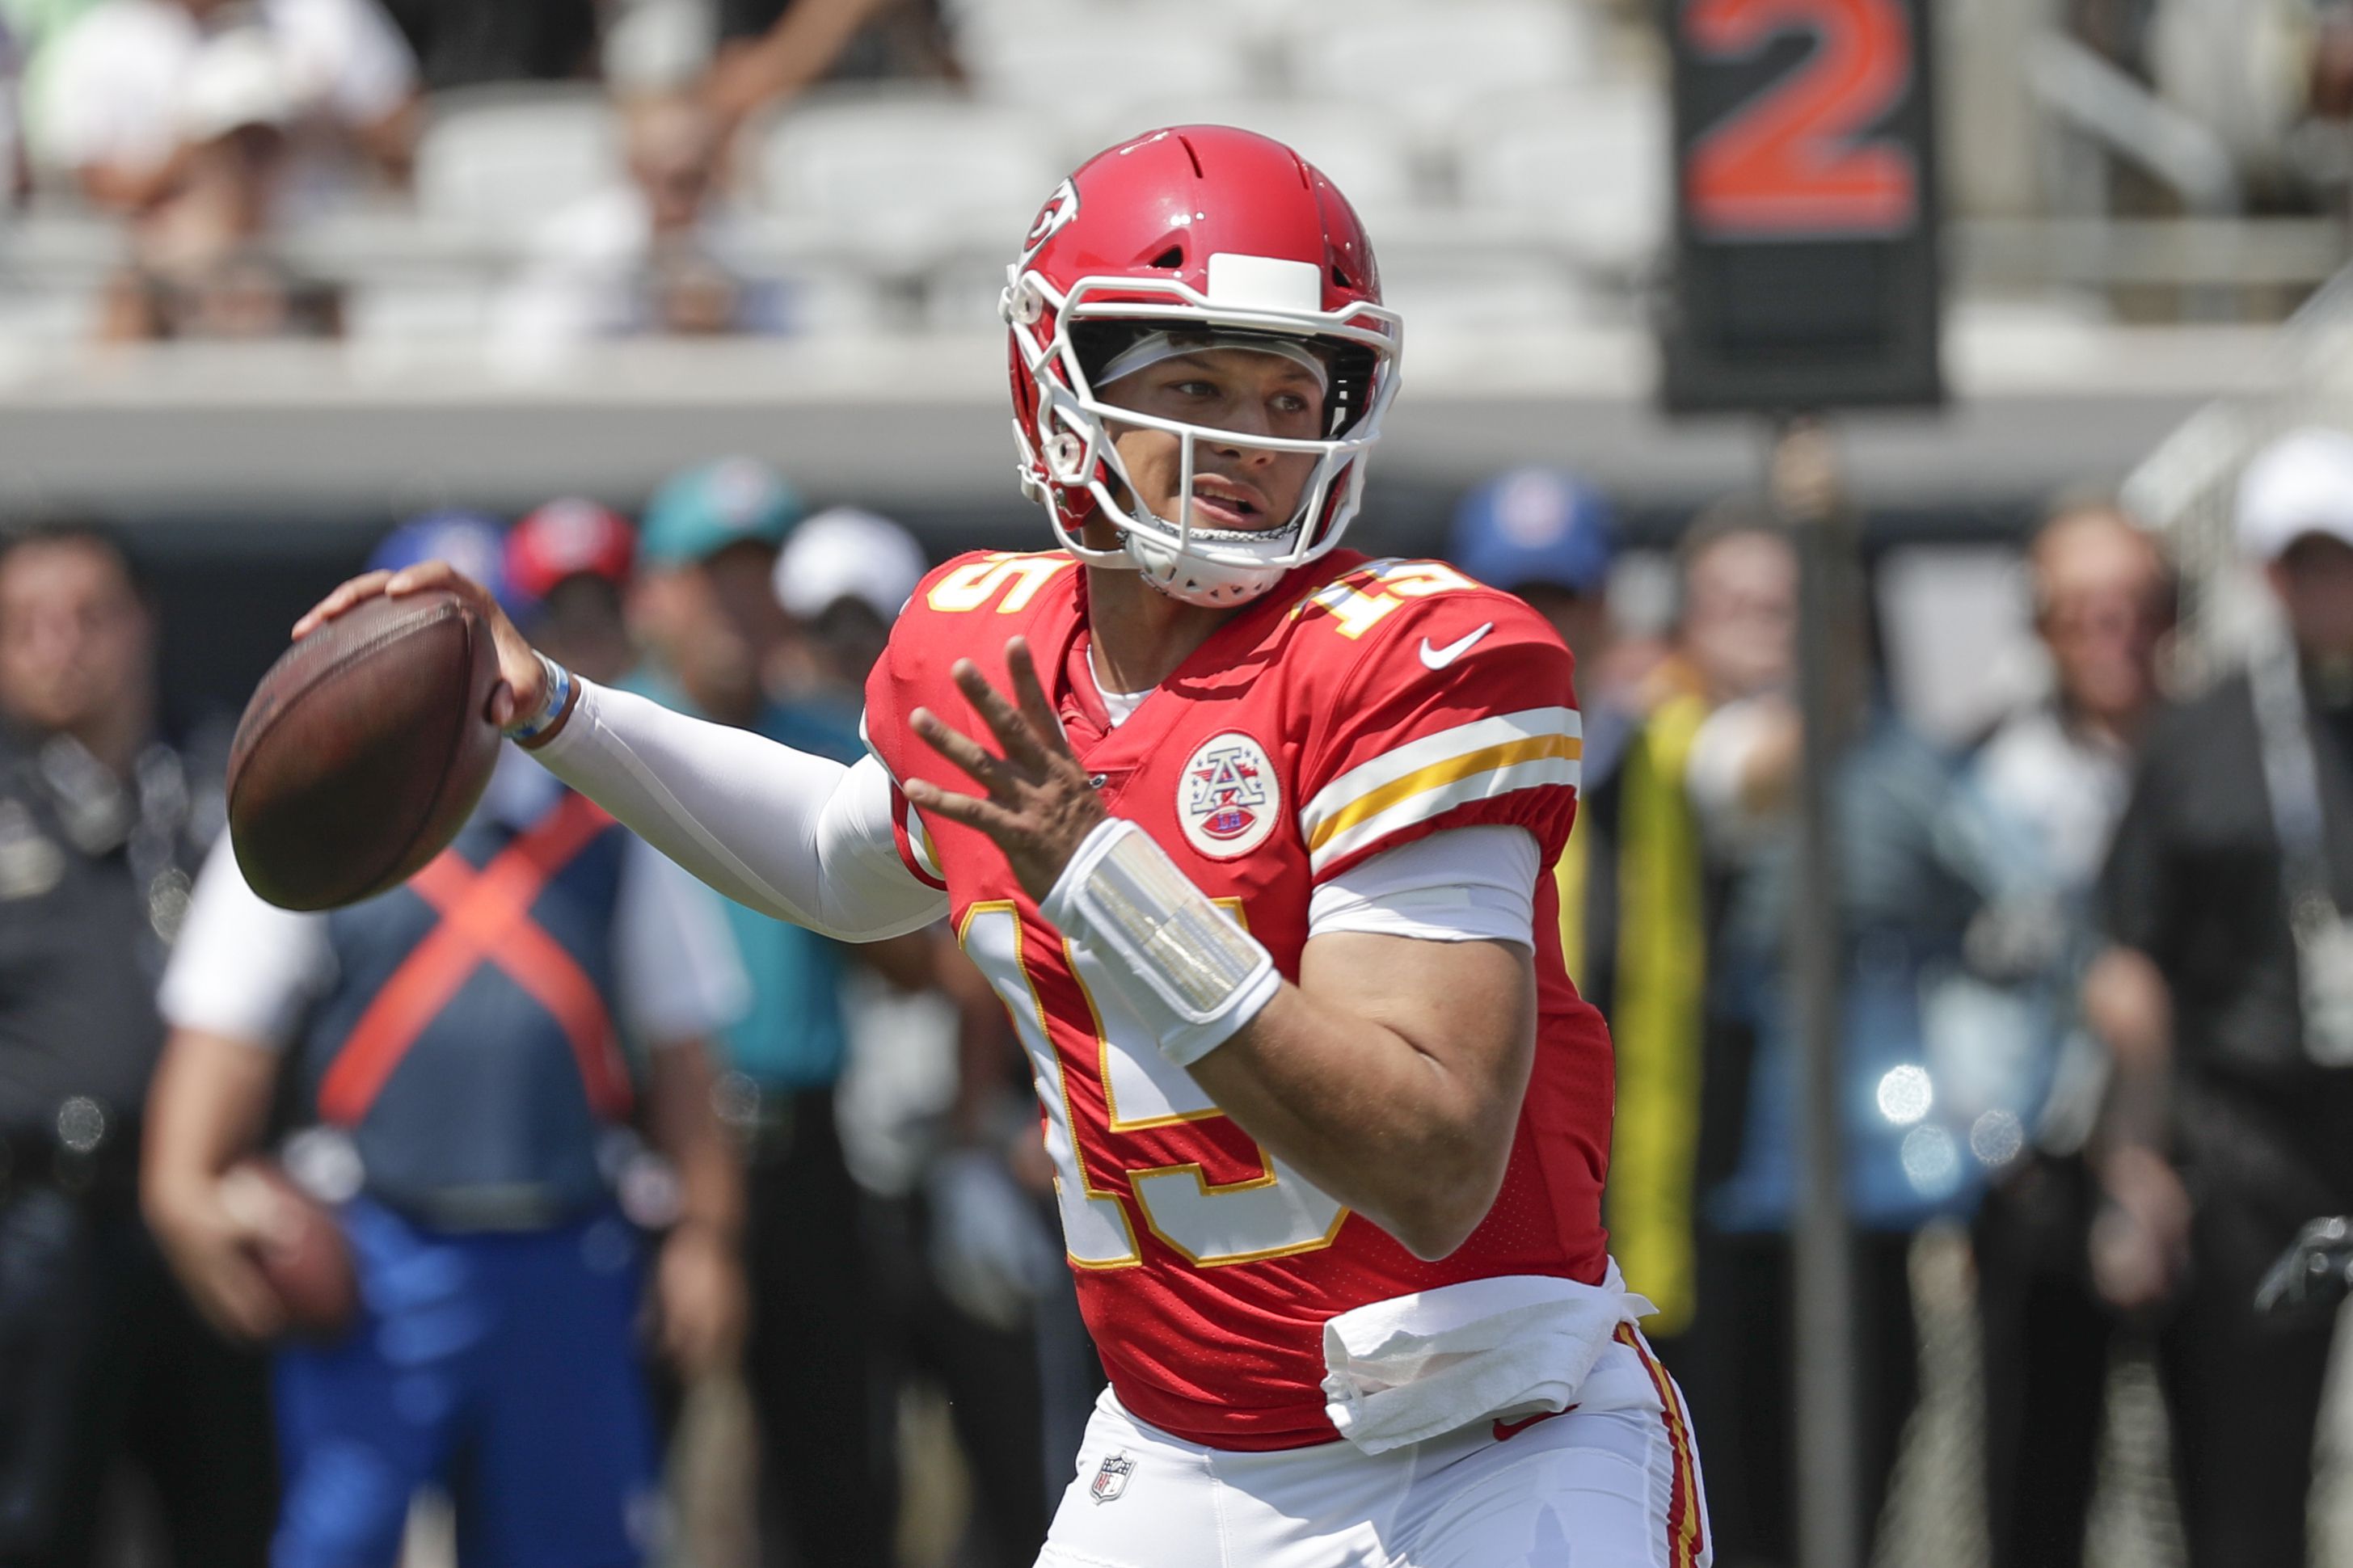 NFL scores, schedule, live updates in Week 1: Patrick Mahomes with